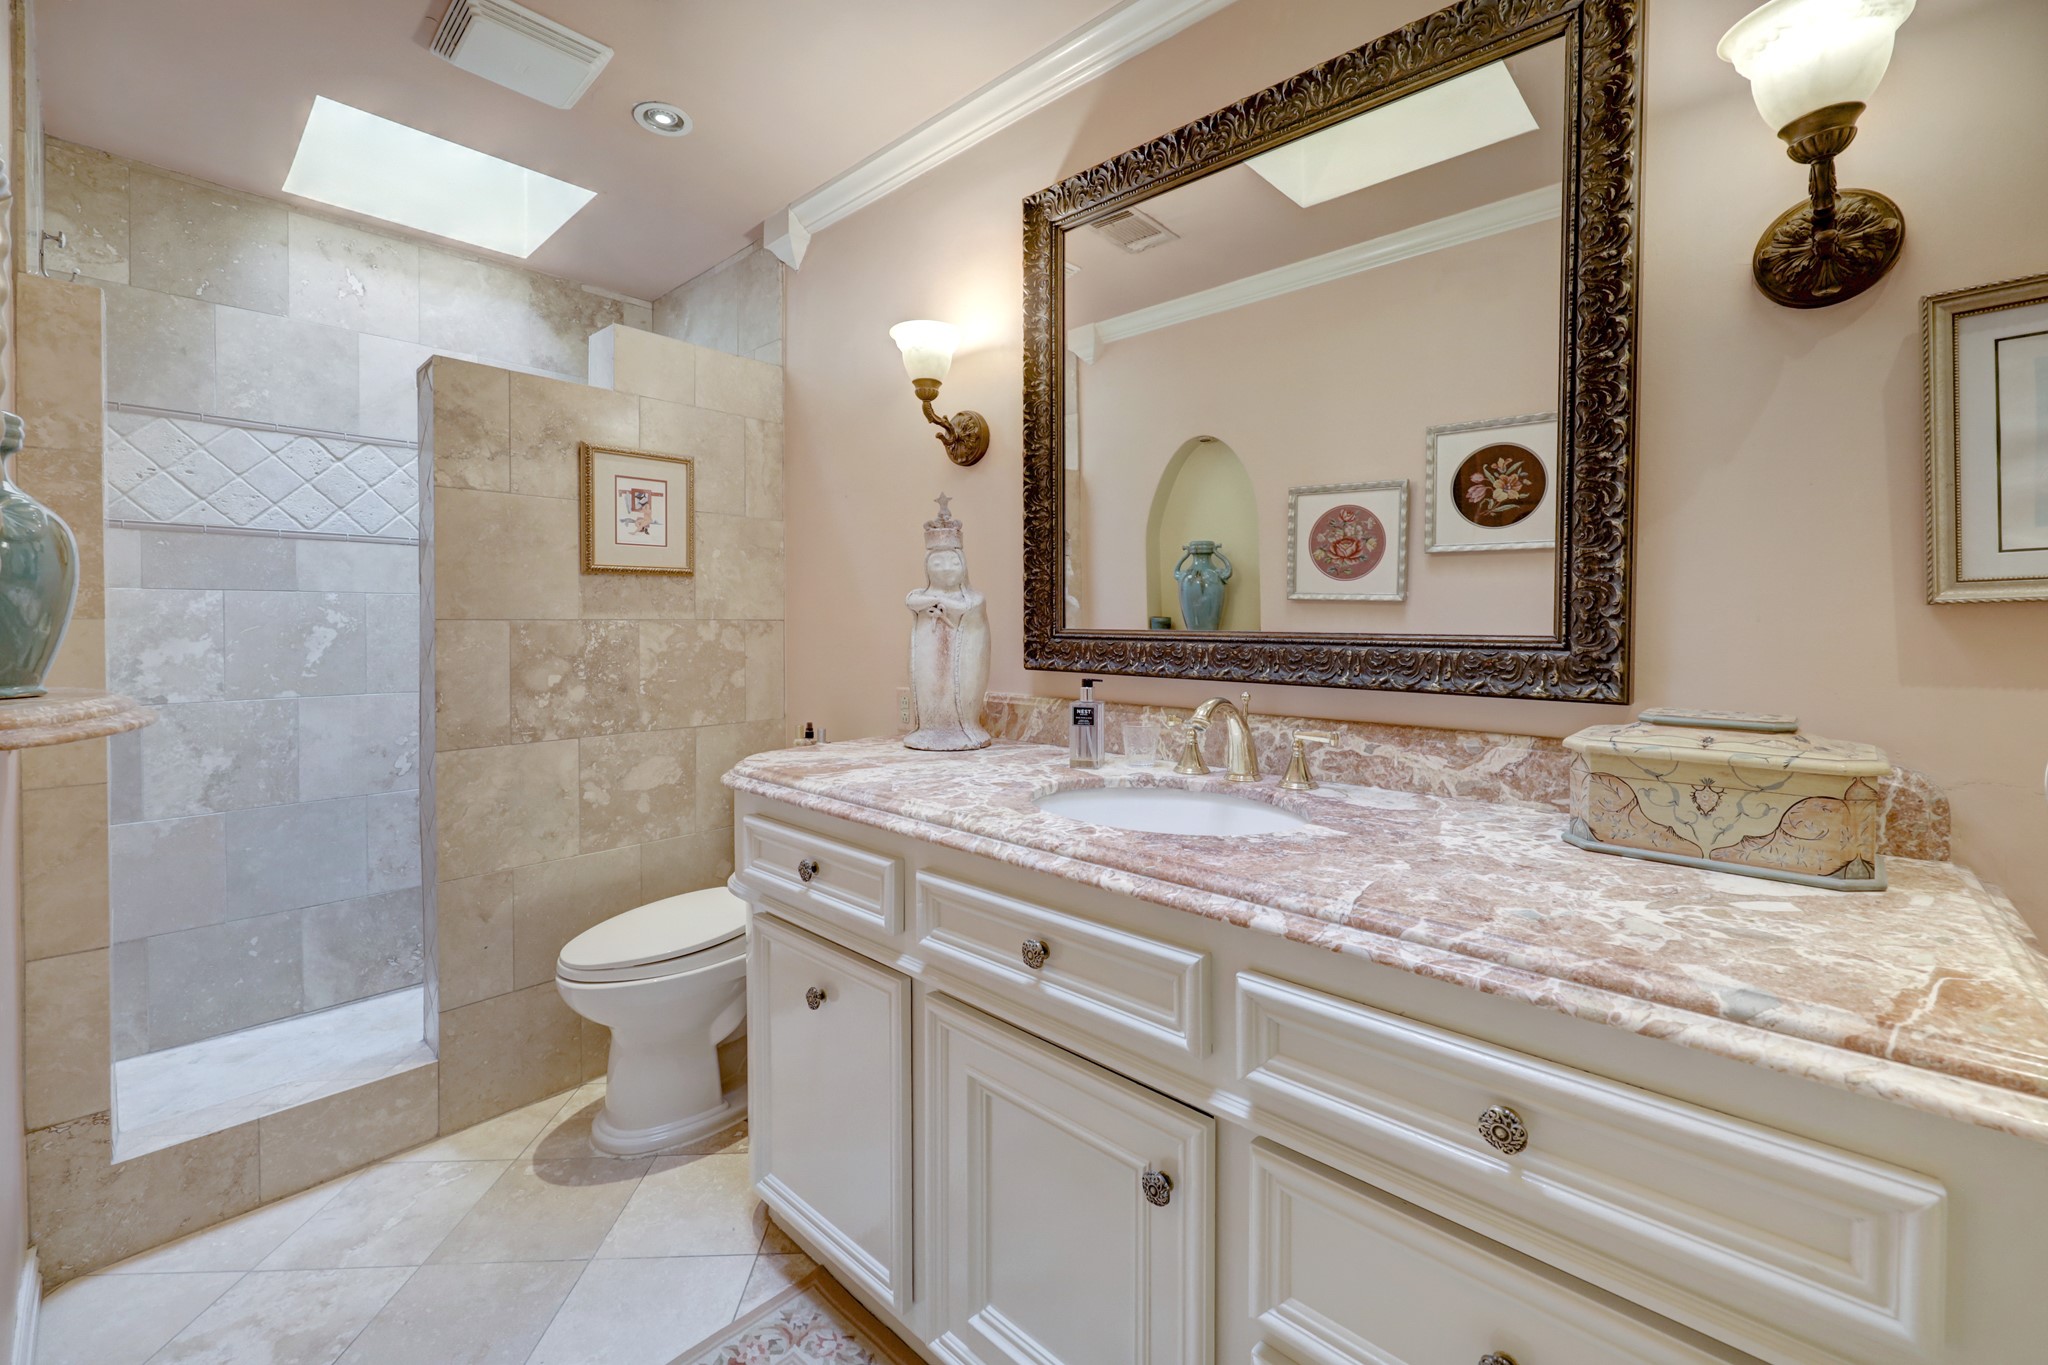 PRIMARY BATHROOM is a beautiful en-suite with granite counter and oversized walk-in shower.